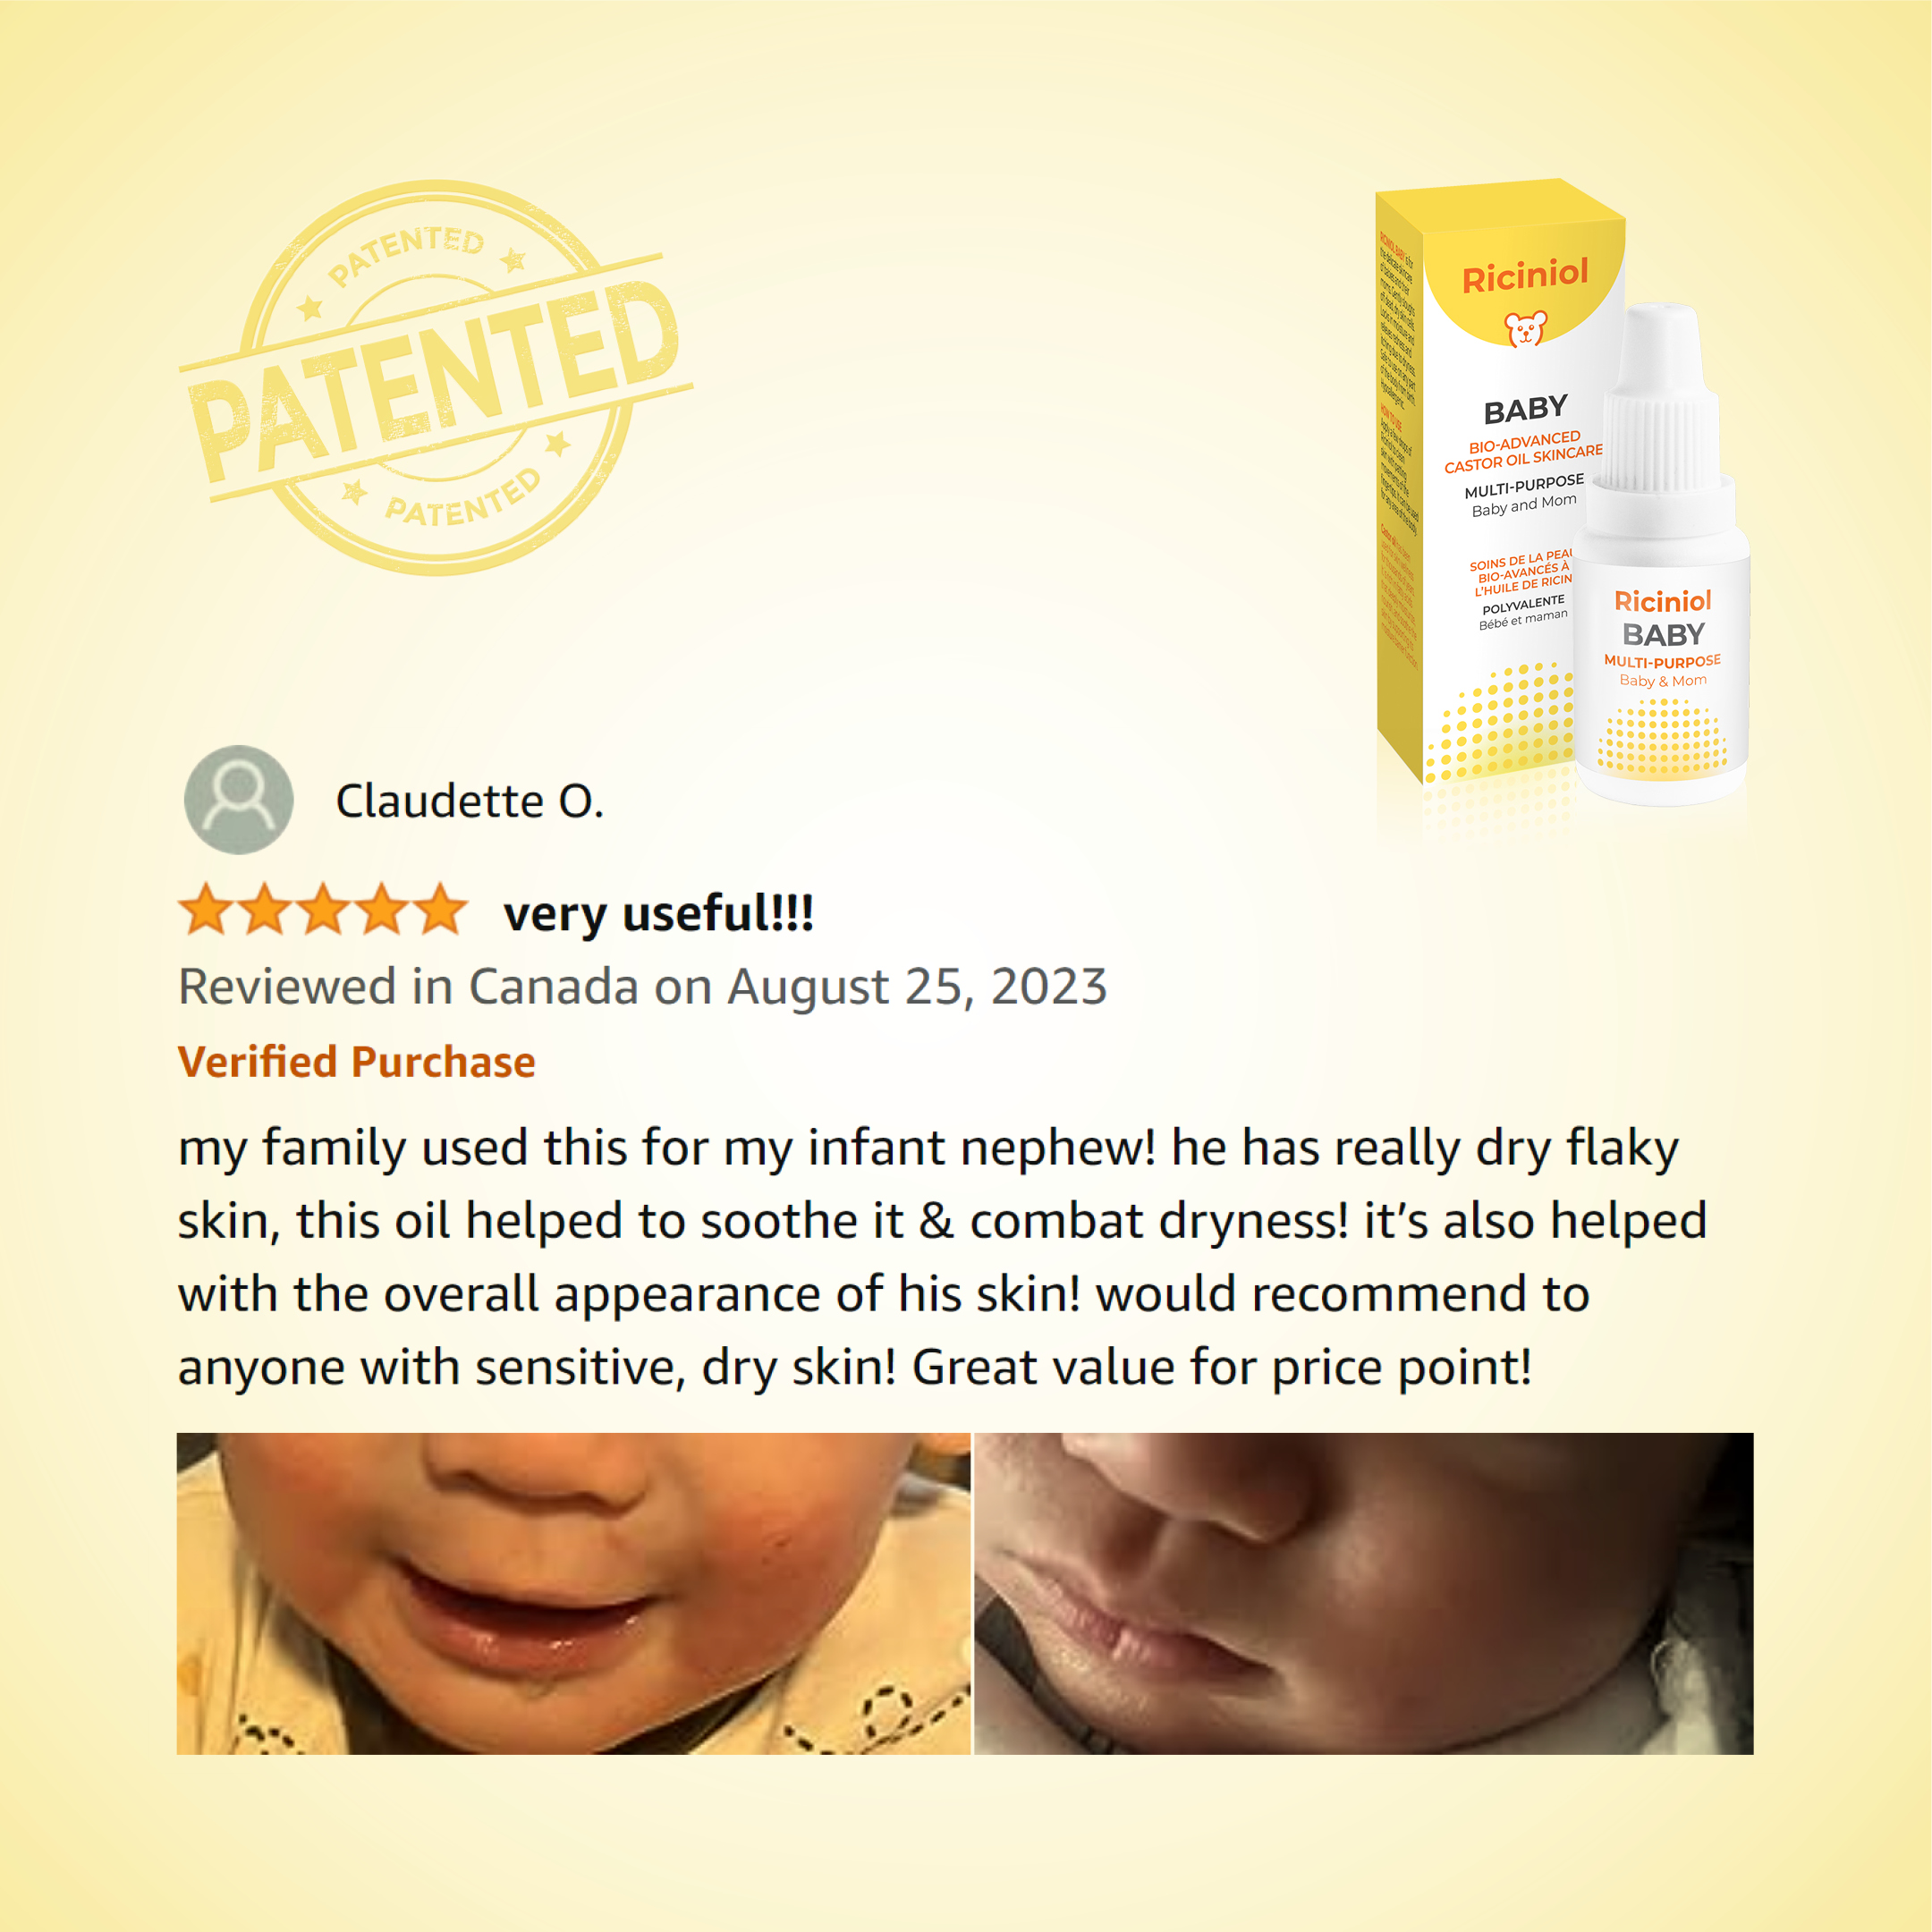 Riciniol Baby my family used this for my infant nephew! he has really dry flaky skin, this oil helped to soothe it & combat dryness! it’s also helped with the overall appearance of his skin! would recommend to anyone with sensitive, dry skin! Great value for price point!